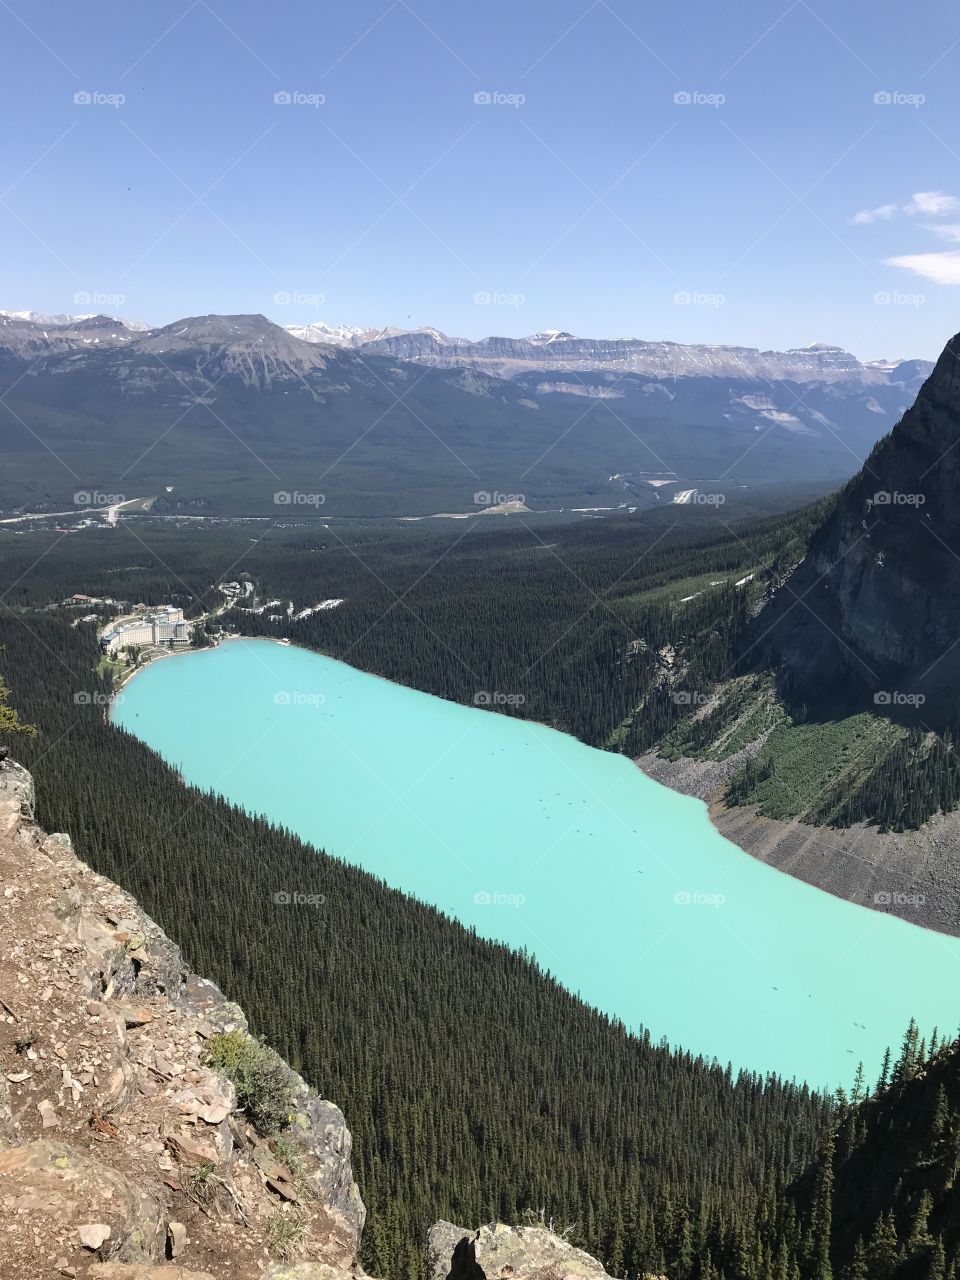 Lake Louise at Banff National Park looks like a finger painting on a photo. What a breathtaking view.